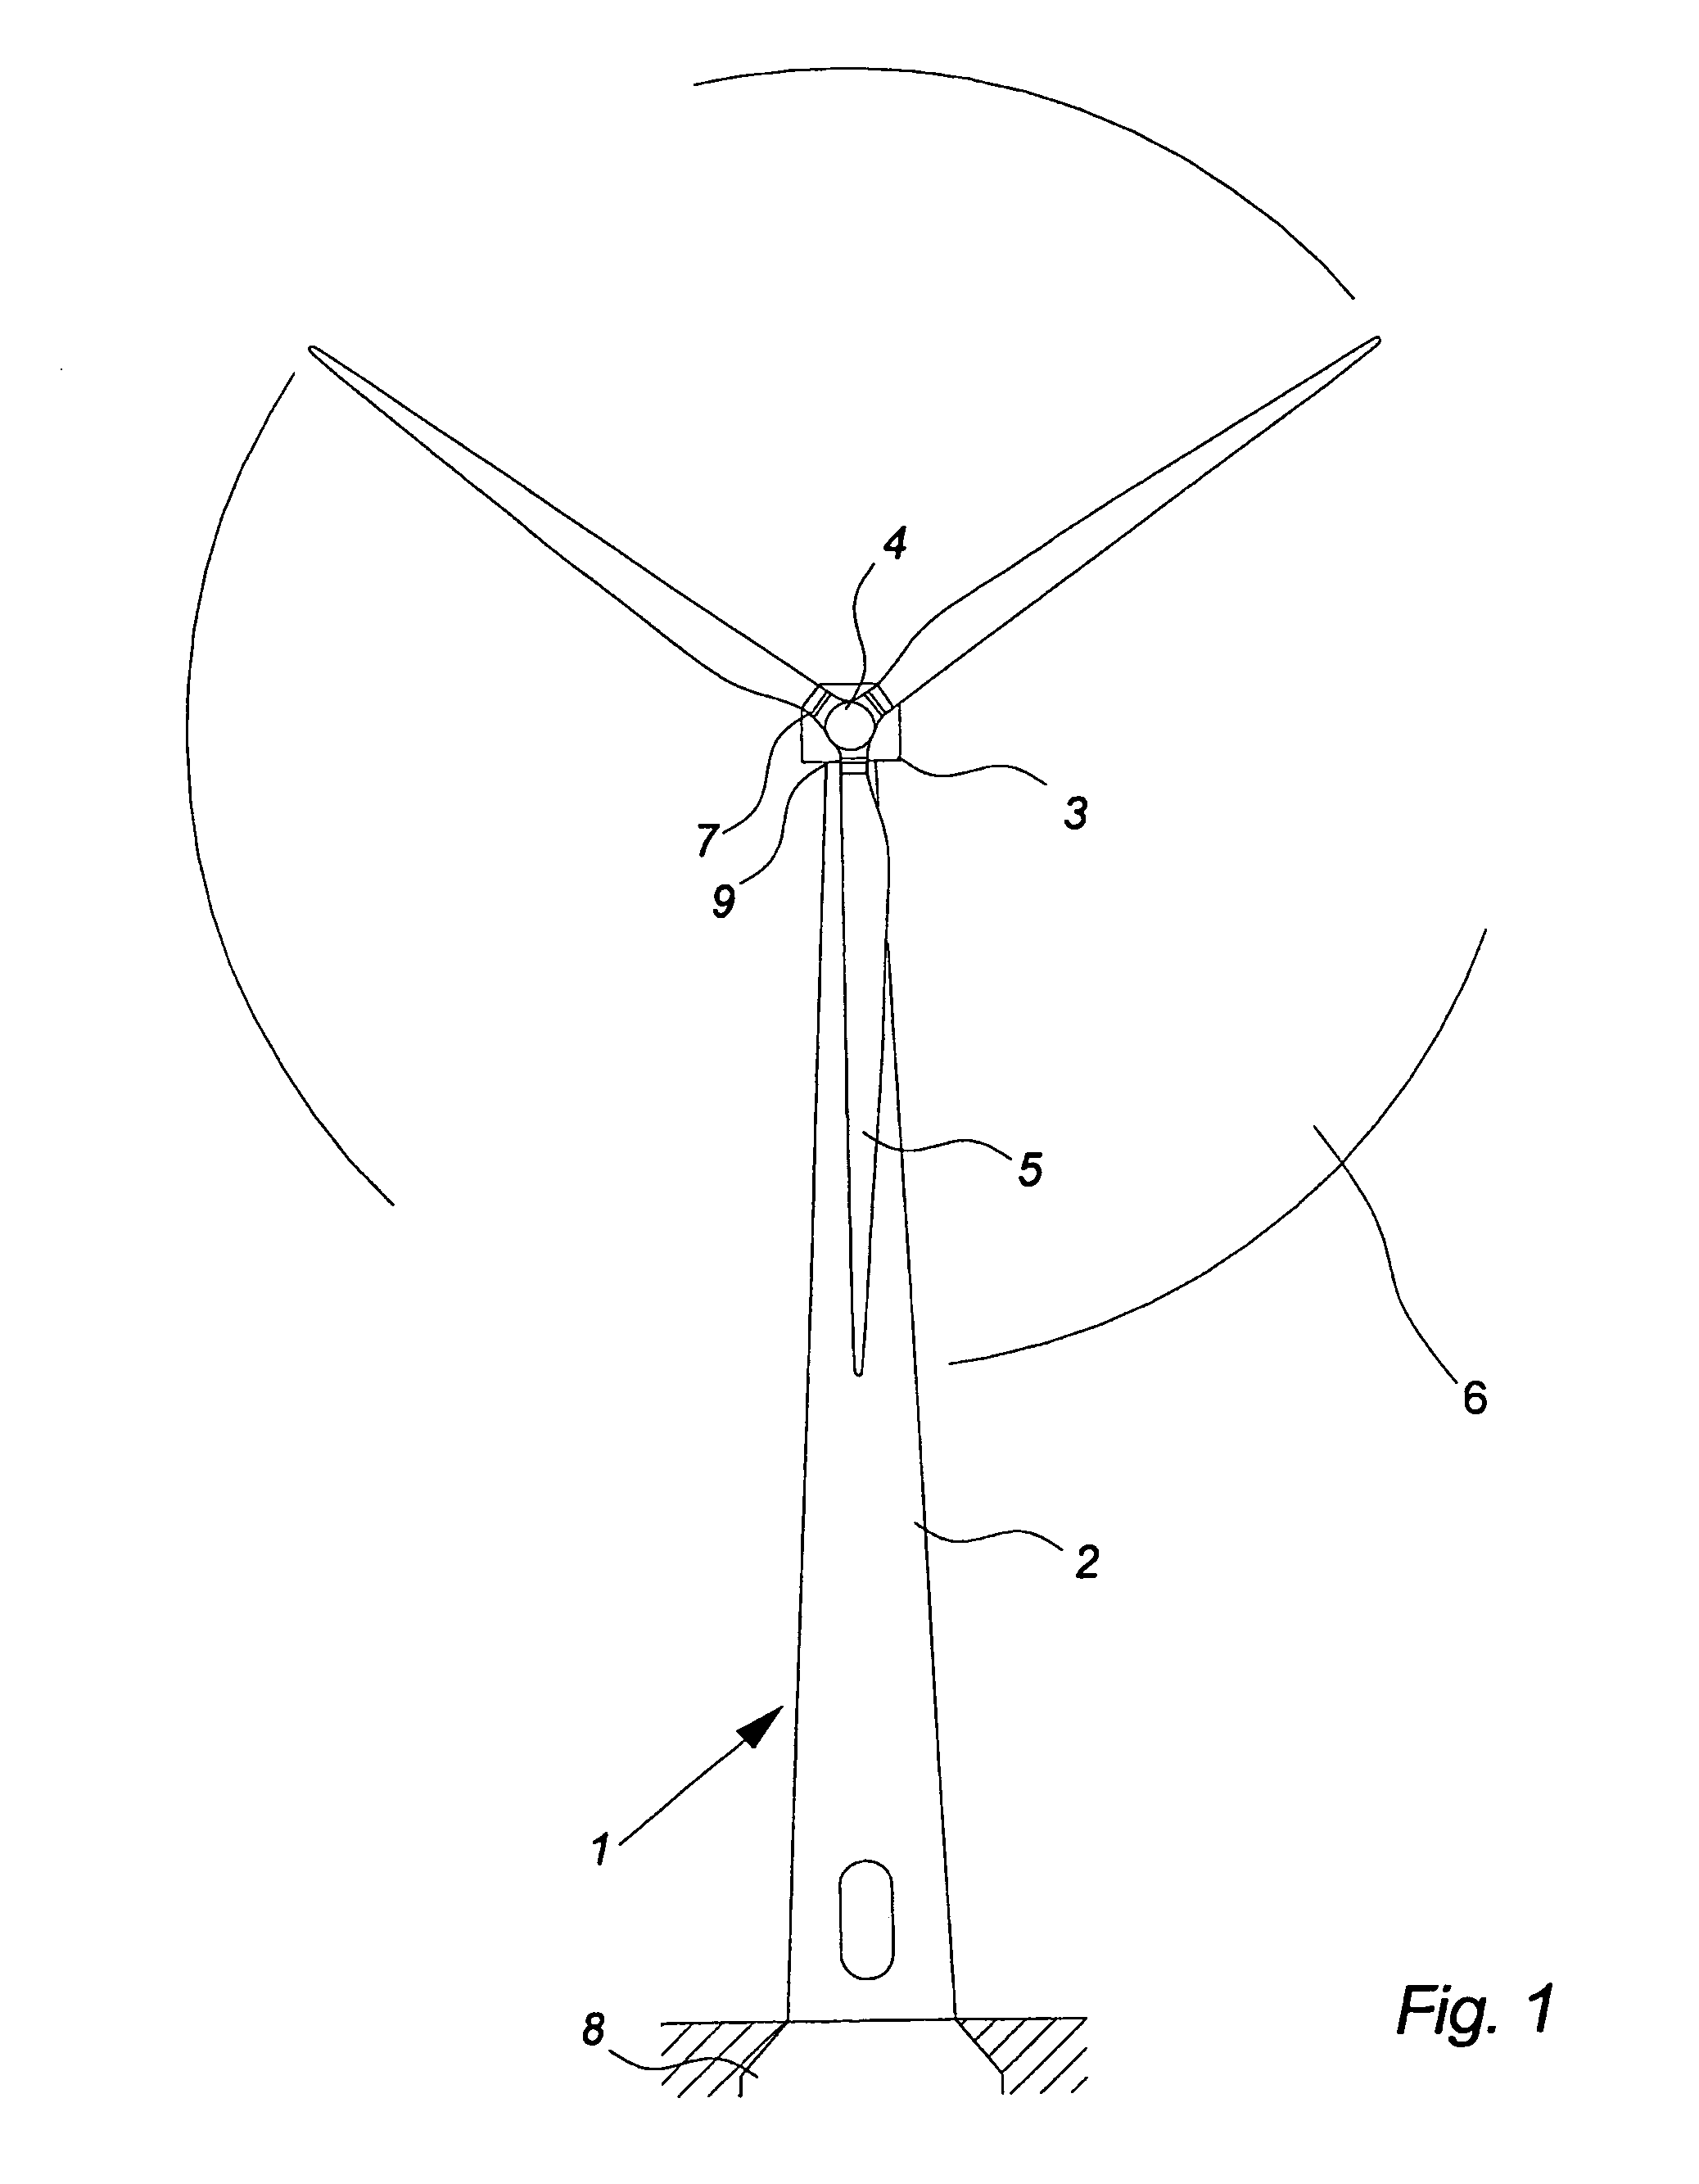 Method for controlling at least one adjustment mechanism of a wind turbine, a wind turbine and a wind park